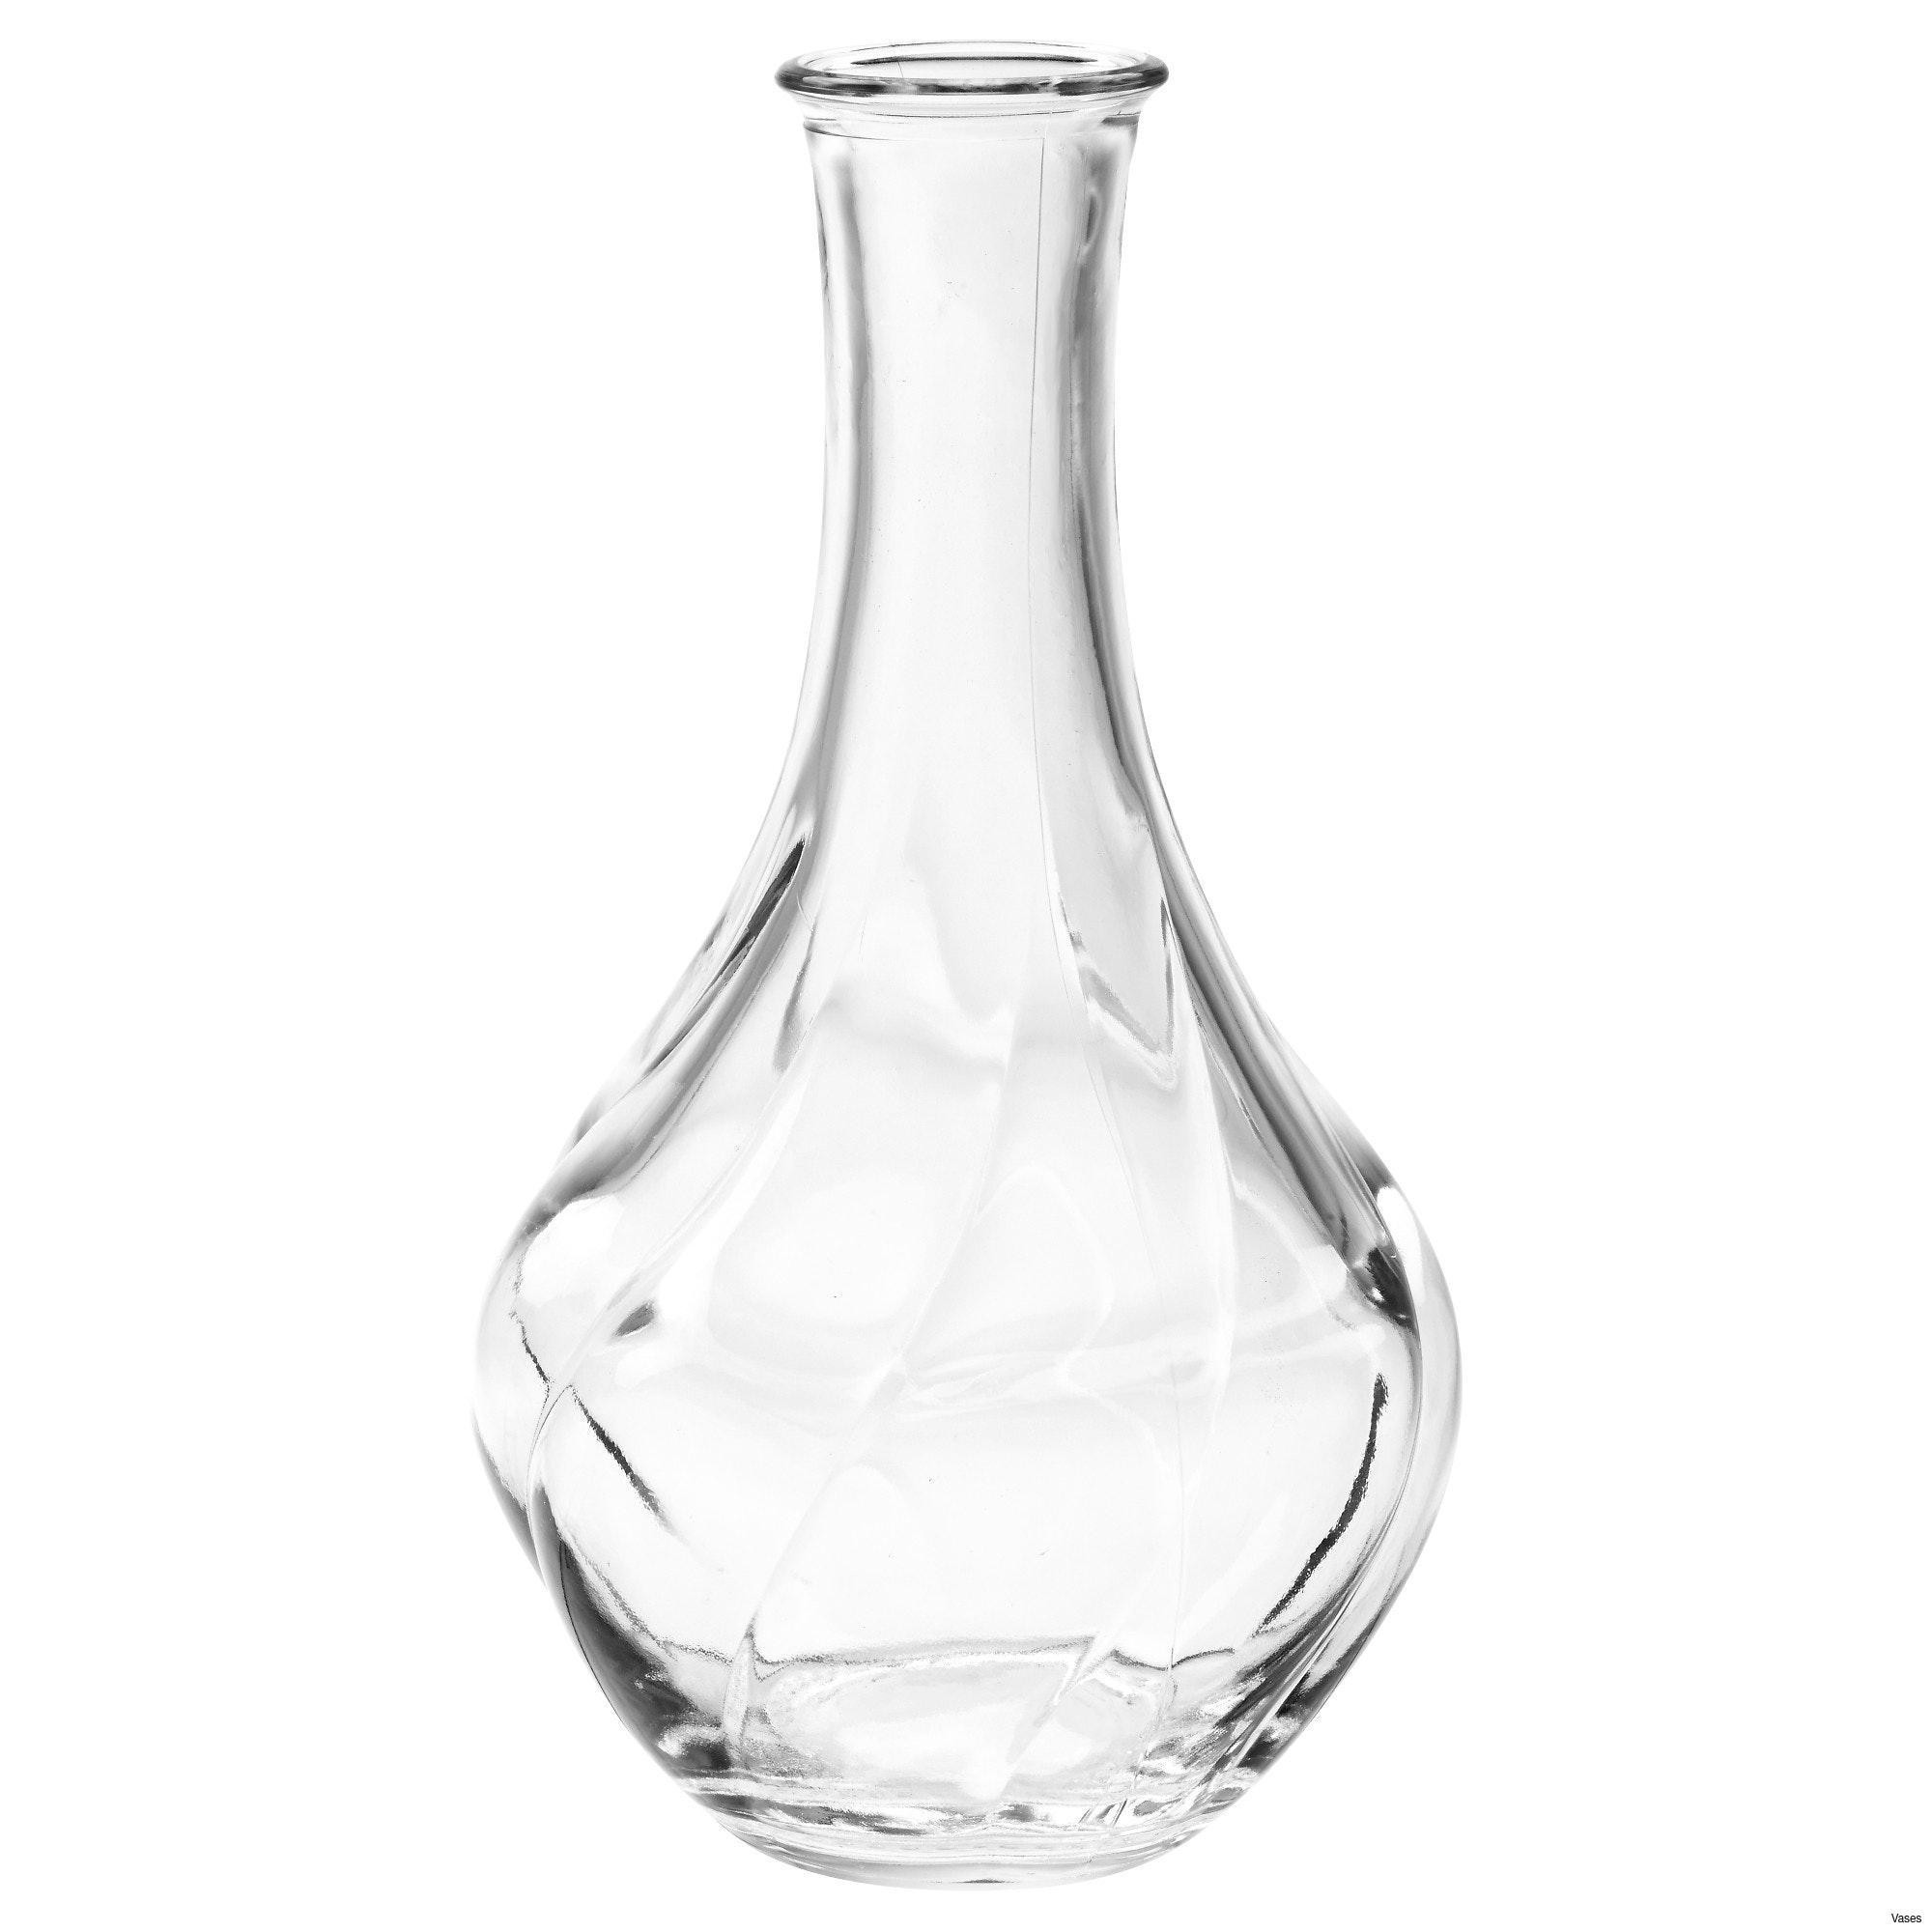 11 Great Vases for Sale Online 2024 free download vases for sale online of collection of extra large glass vase vases artificial plants regarding extra large glass vase image living room glass vases fresh clear vase 0d tags amazing and